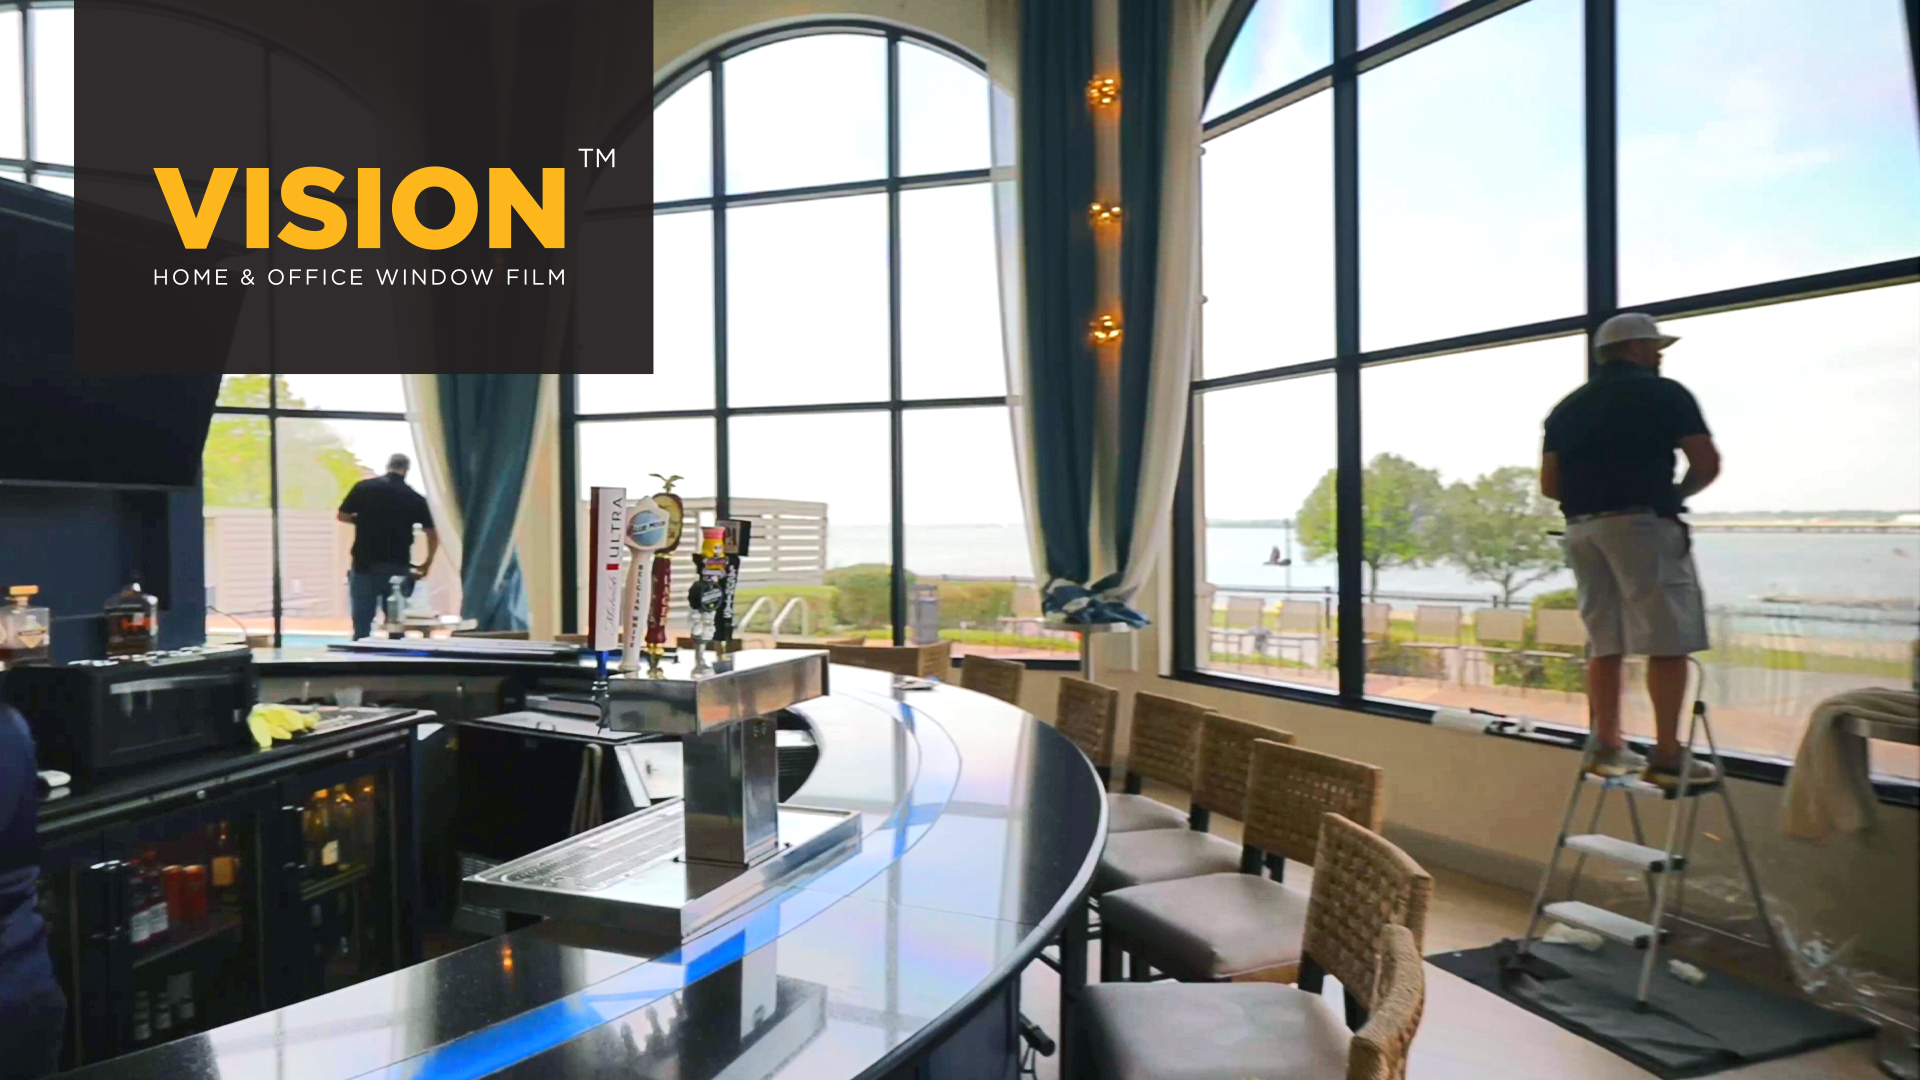 Enjoying Lakefront Views at Hilton Rockwall with VISION Clear View Plus Window FIlm